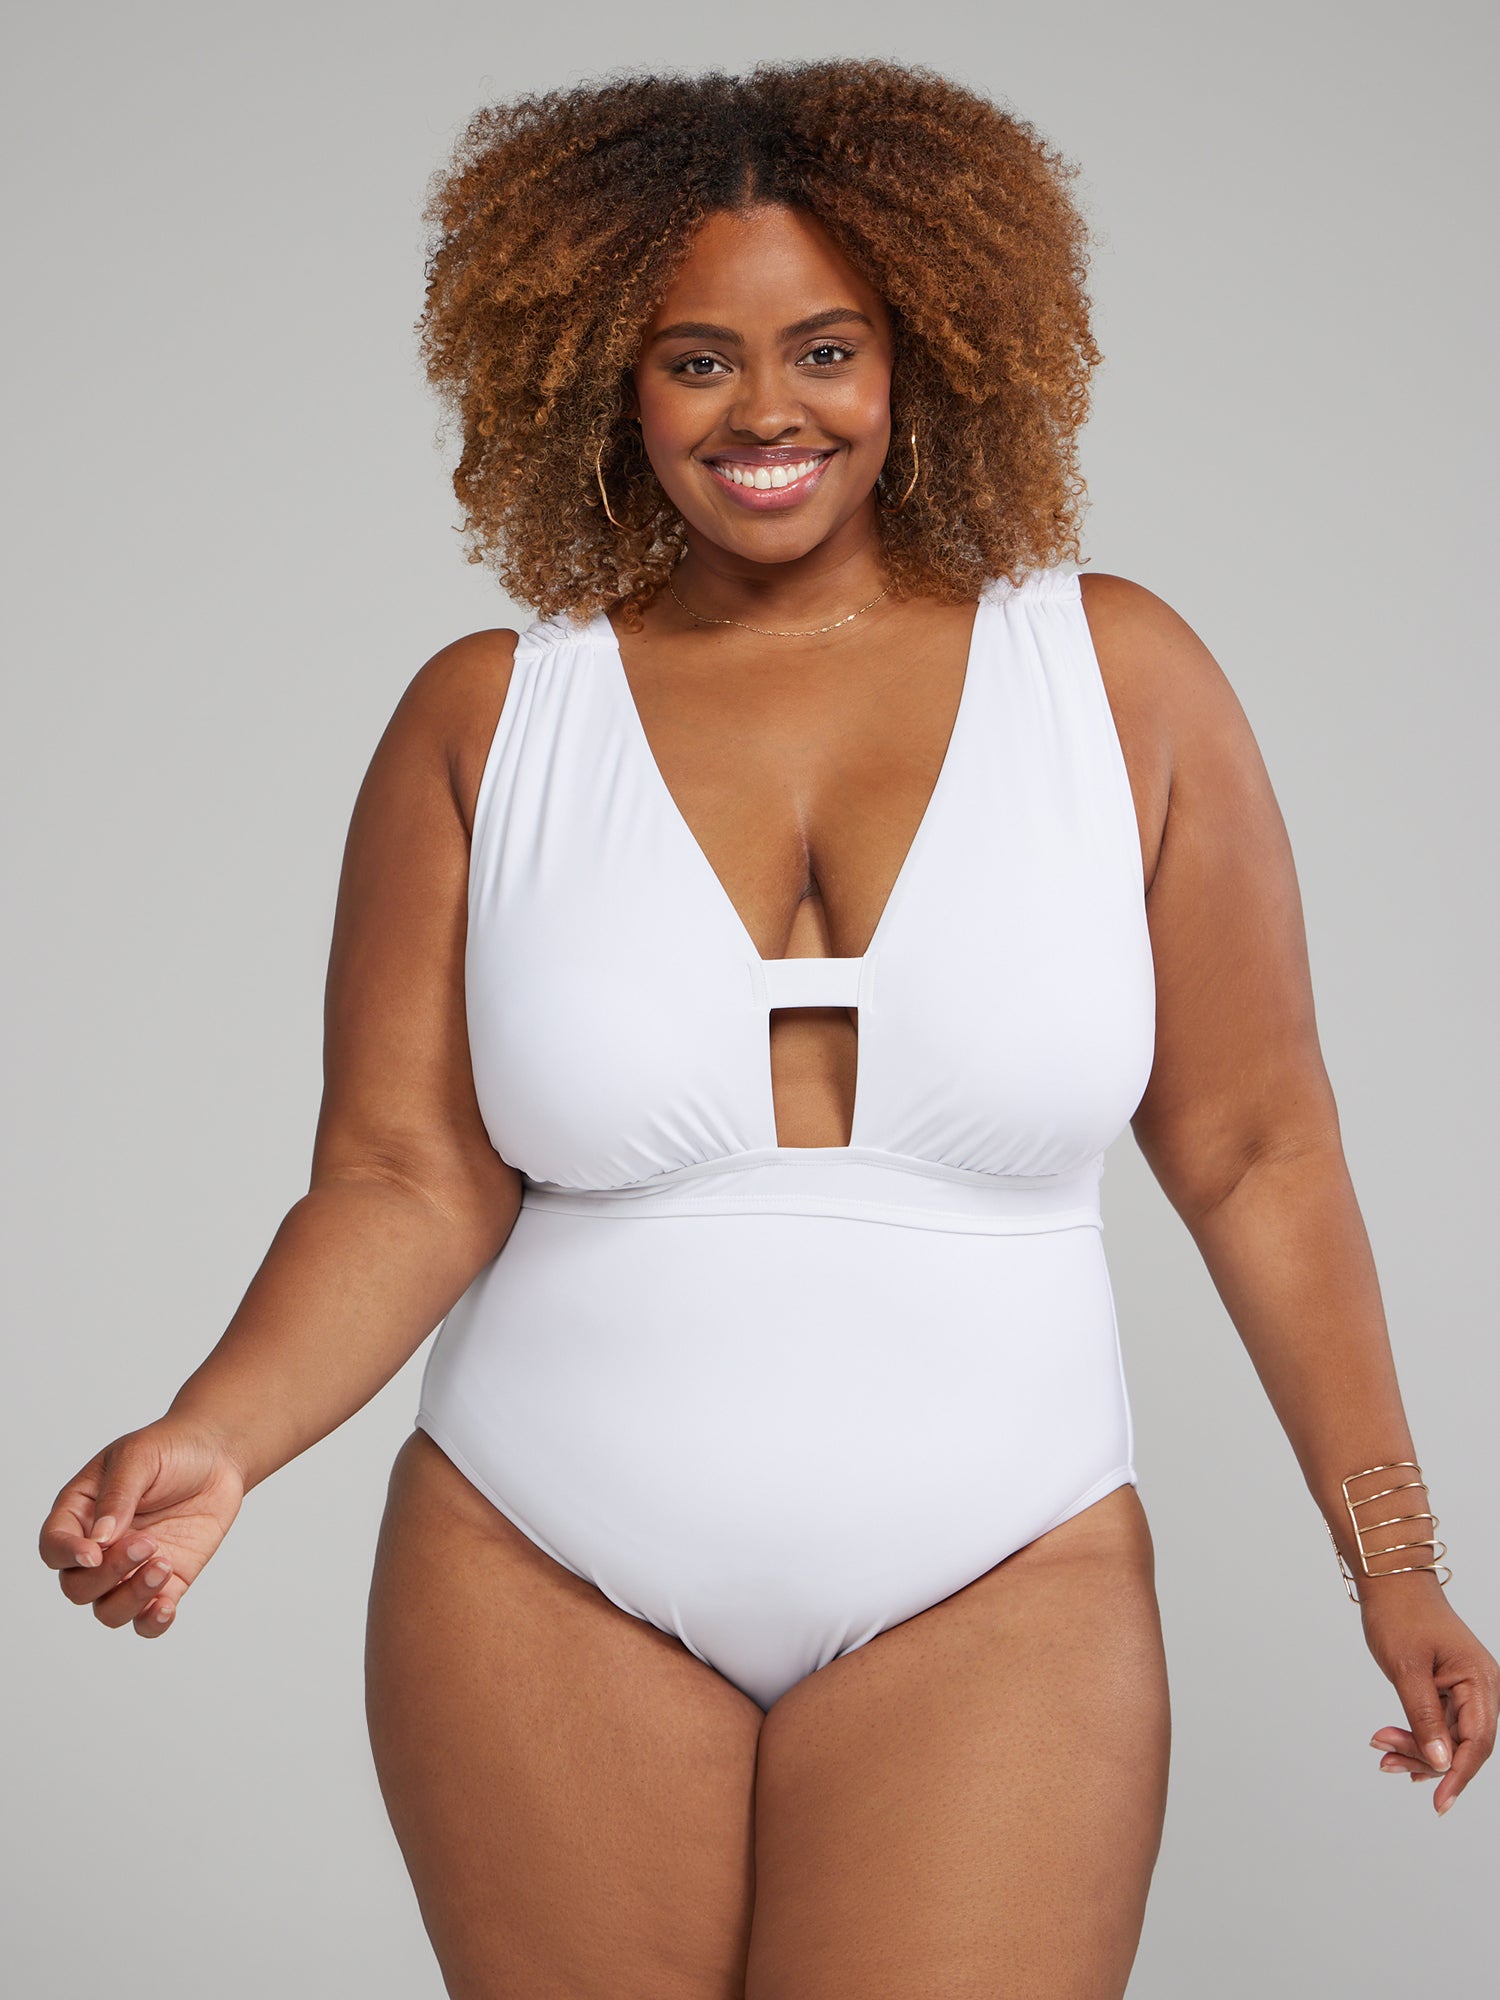 How to clean white swimsuits?